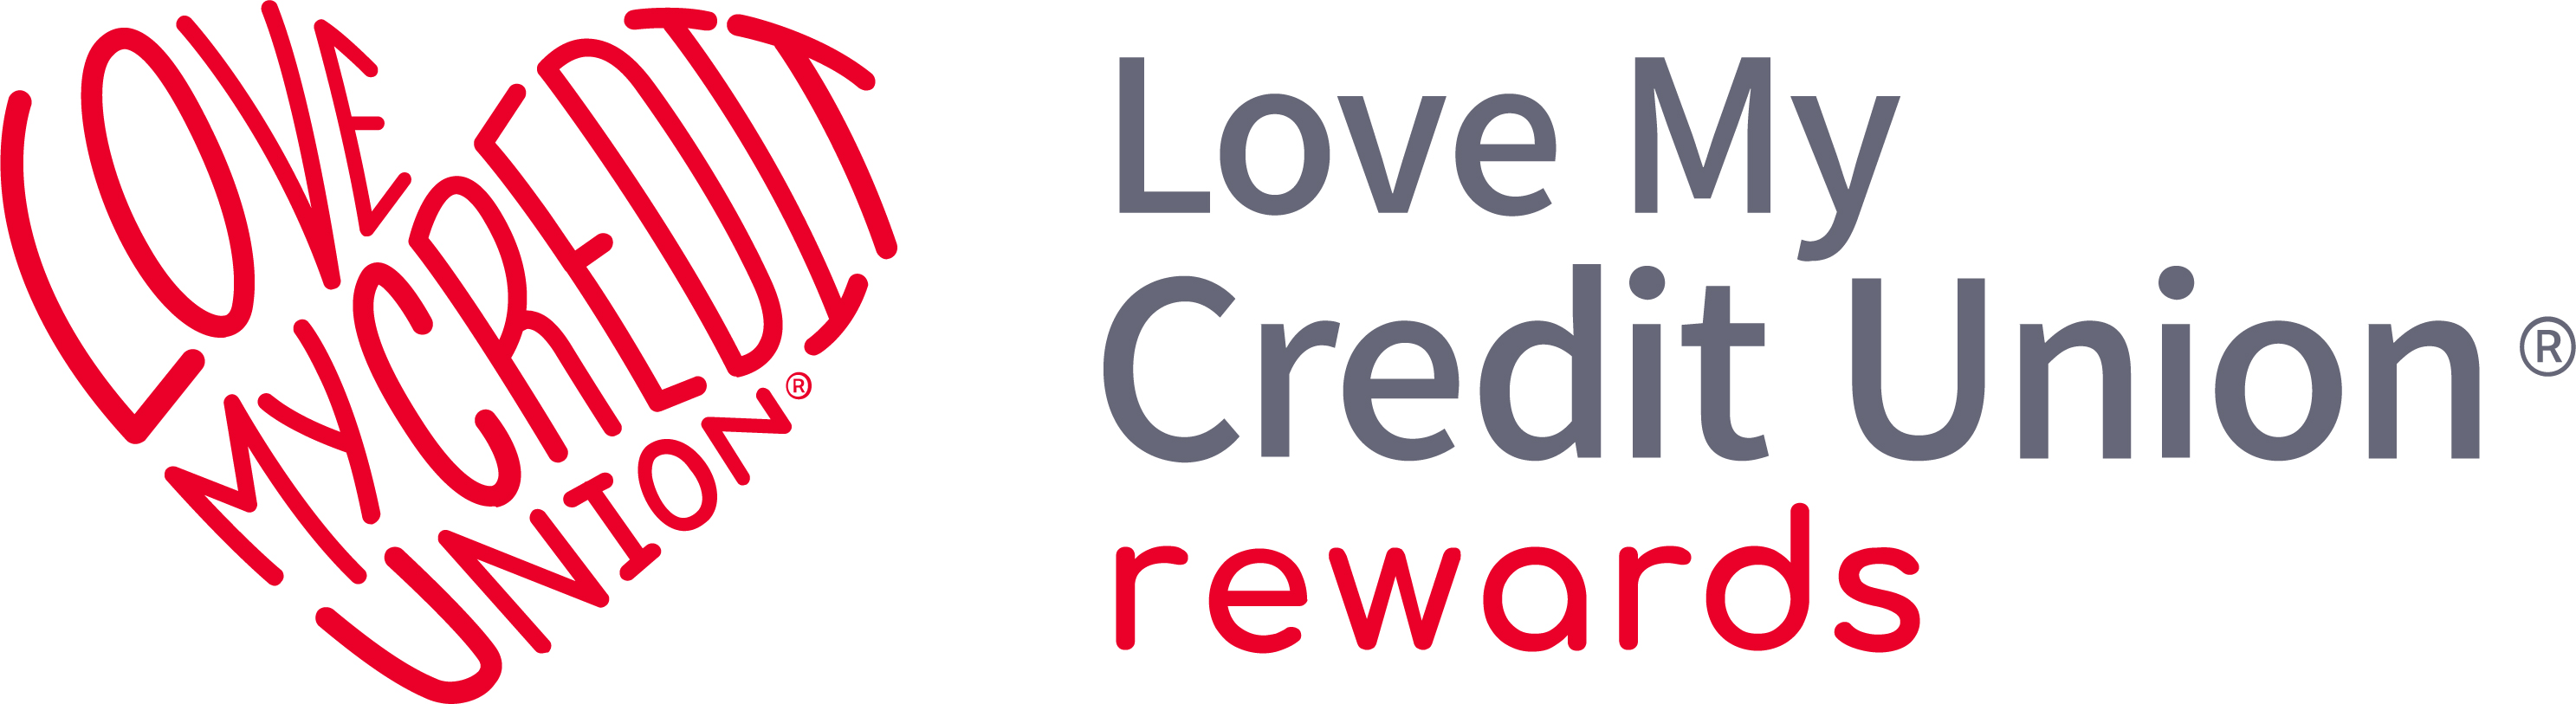 Find more savings at Love My Credit Union Rewards!